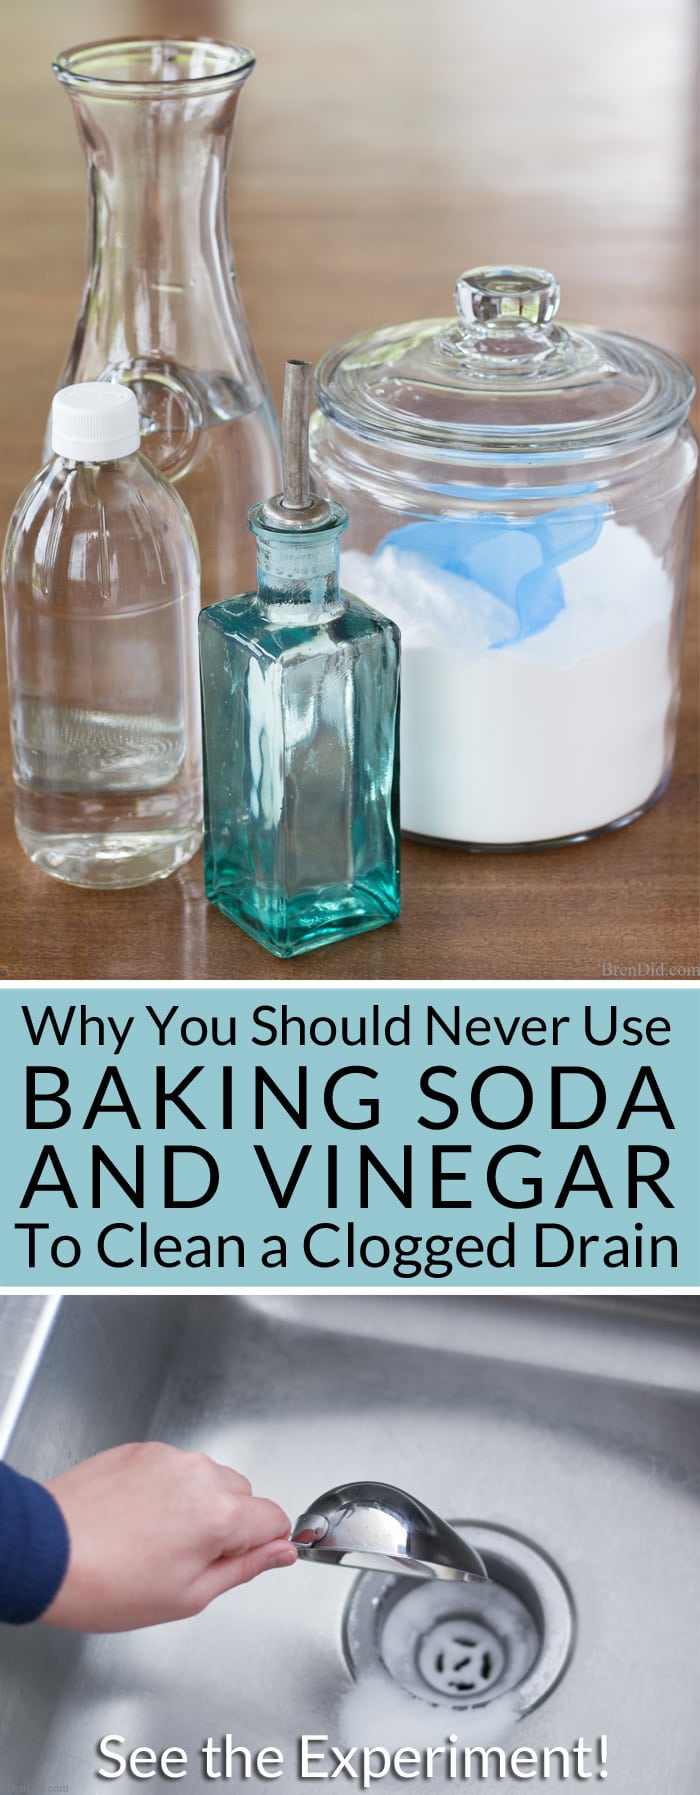 Use Baking Soda and Vinegar to Clean